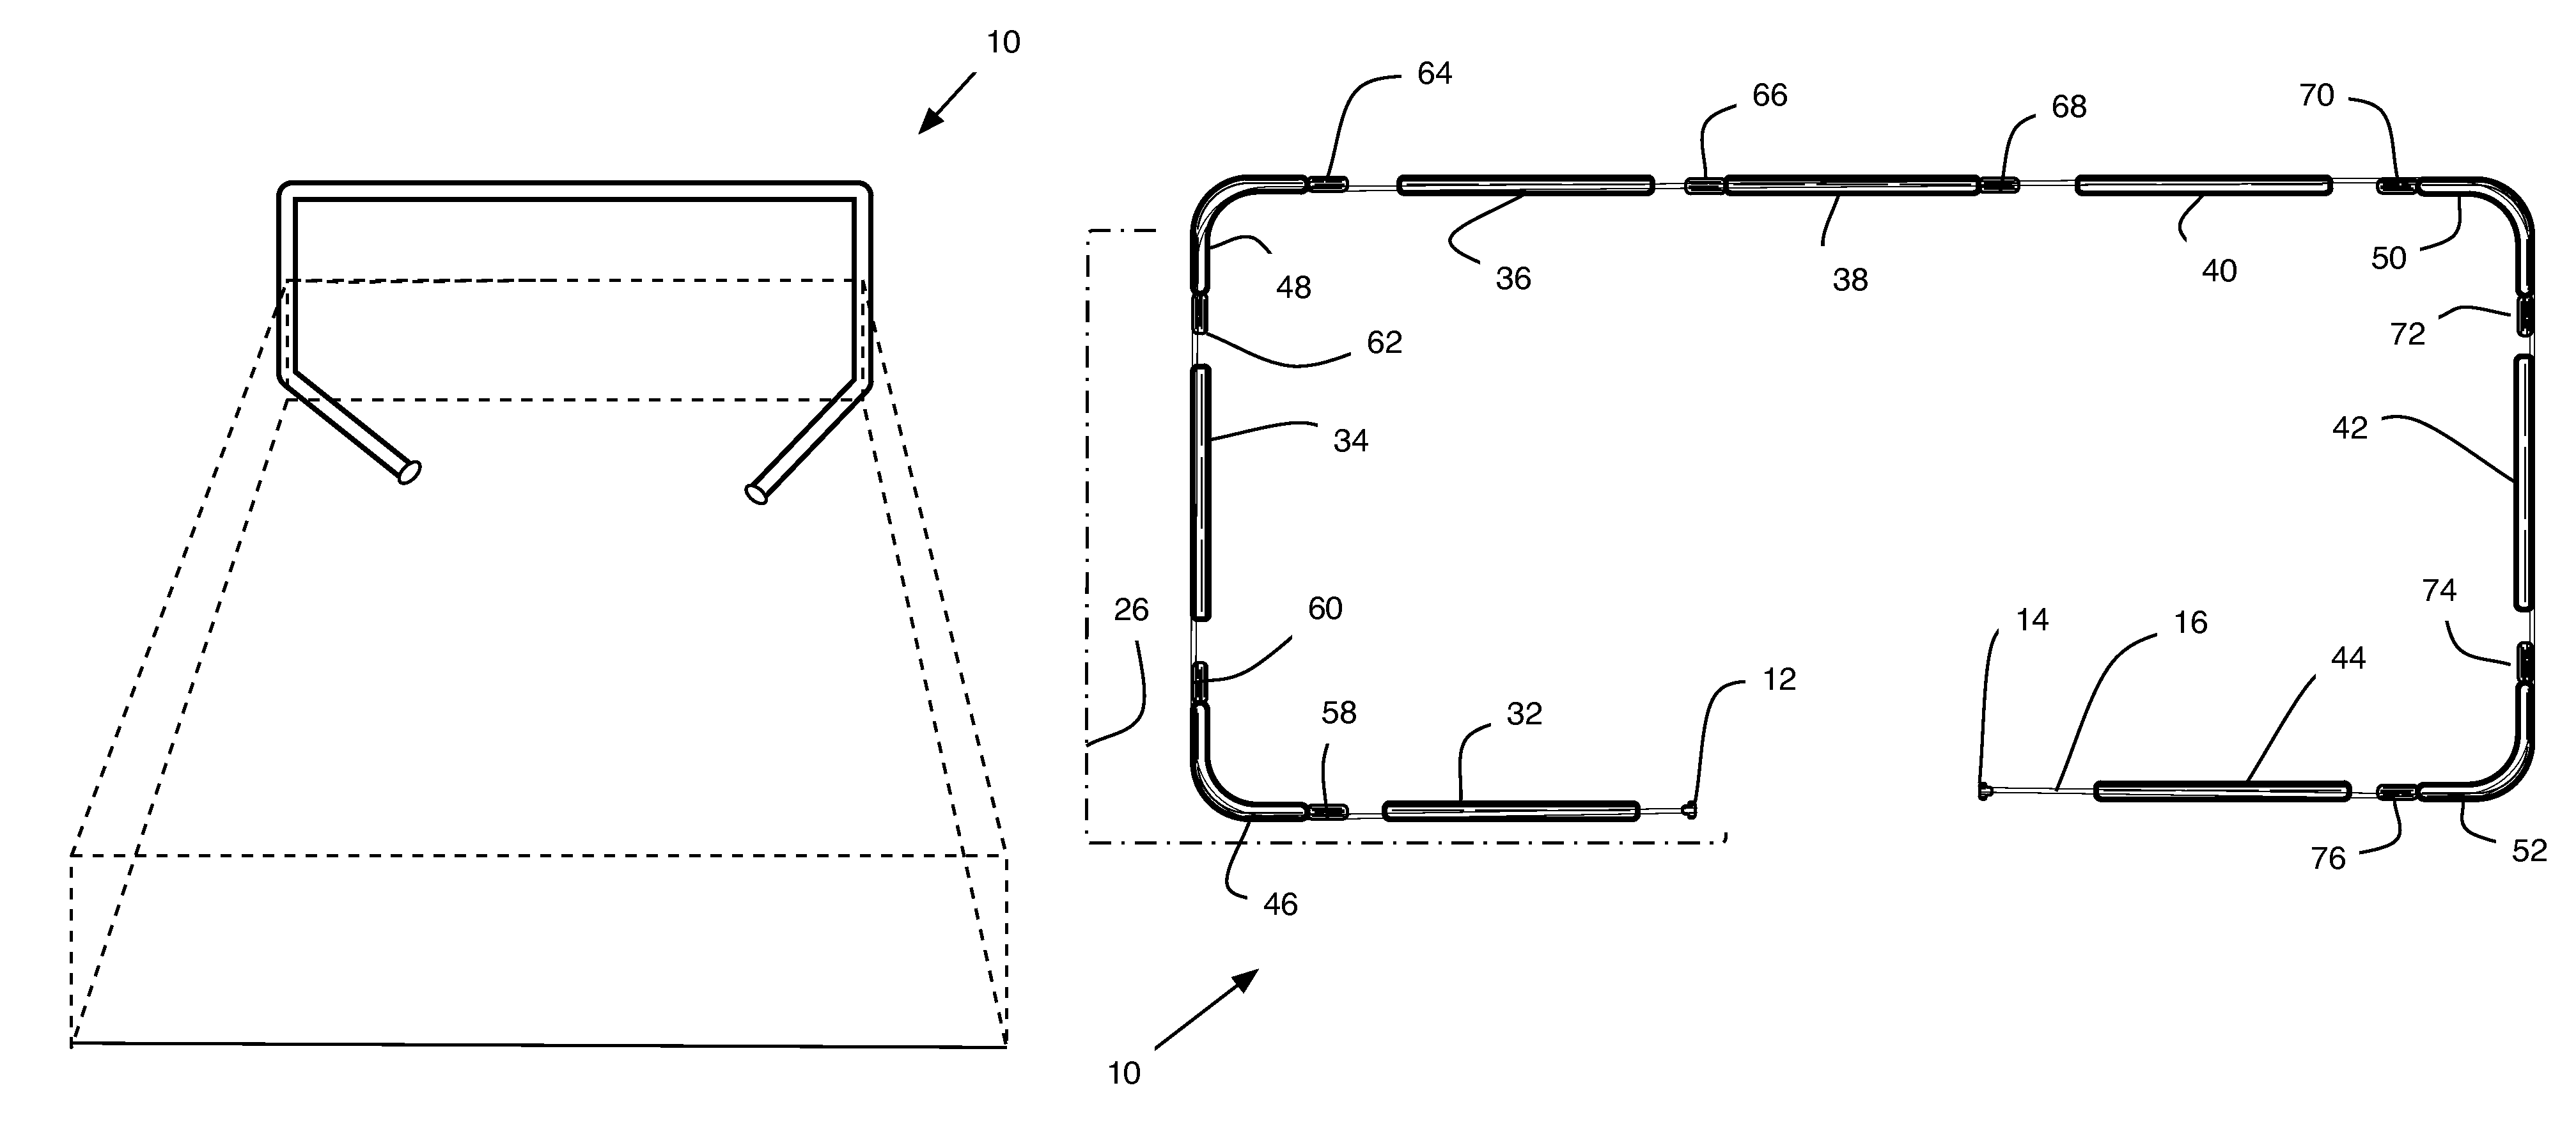 Support frame for elevating a bed covering